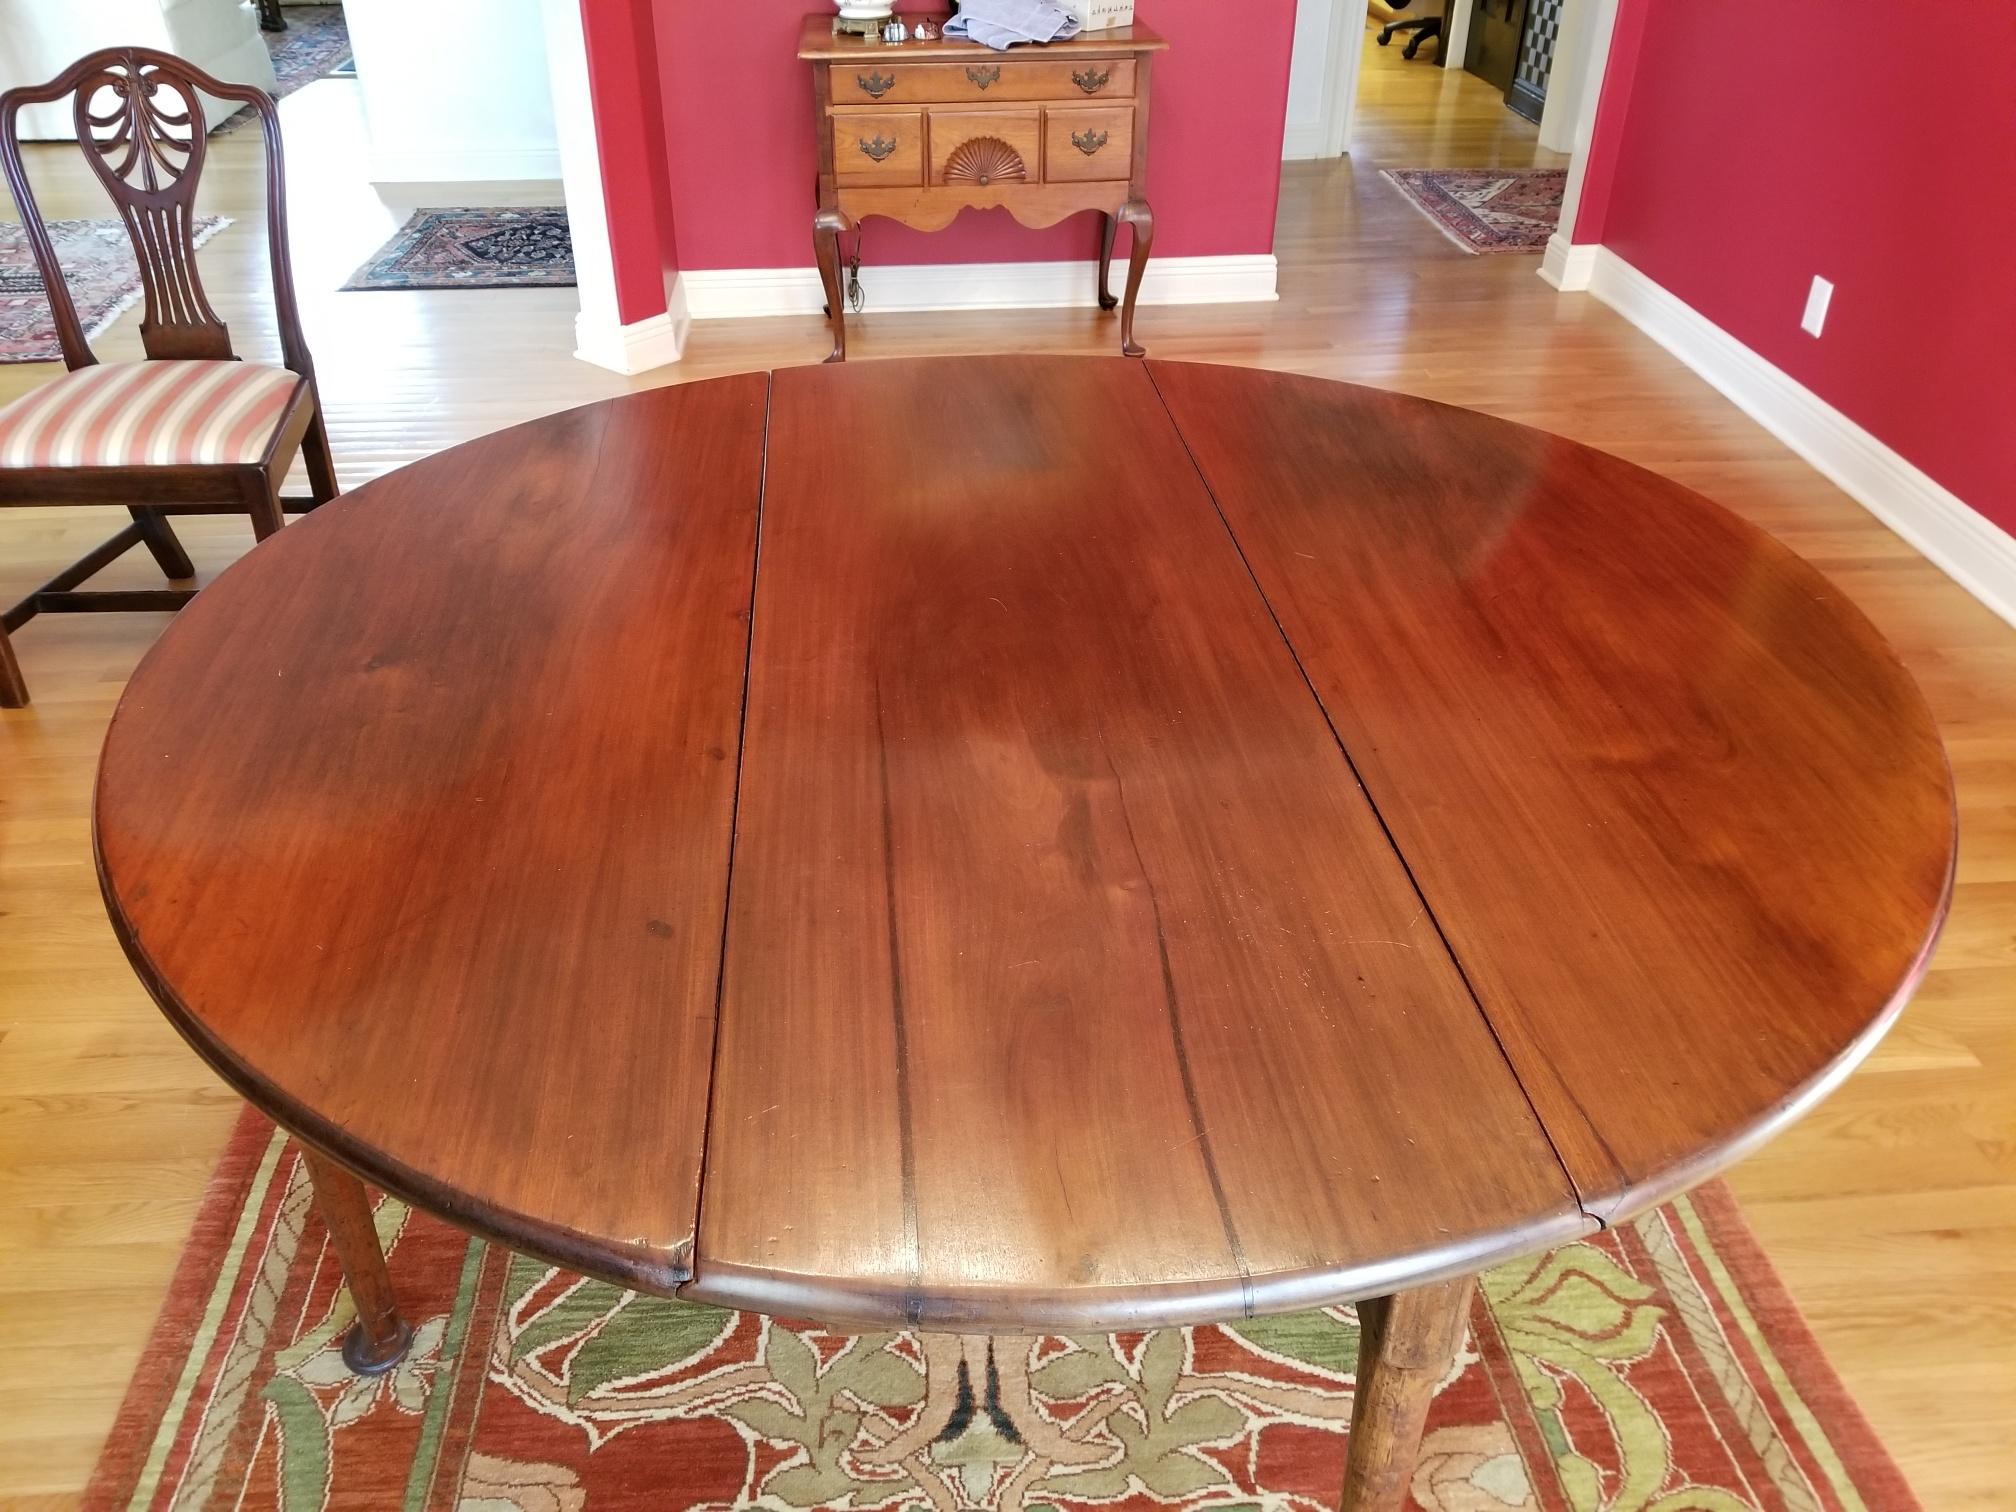 American Queen Anne Mahogany Oval Drop-Leaf Table with Pad Feet, 18th Century 5